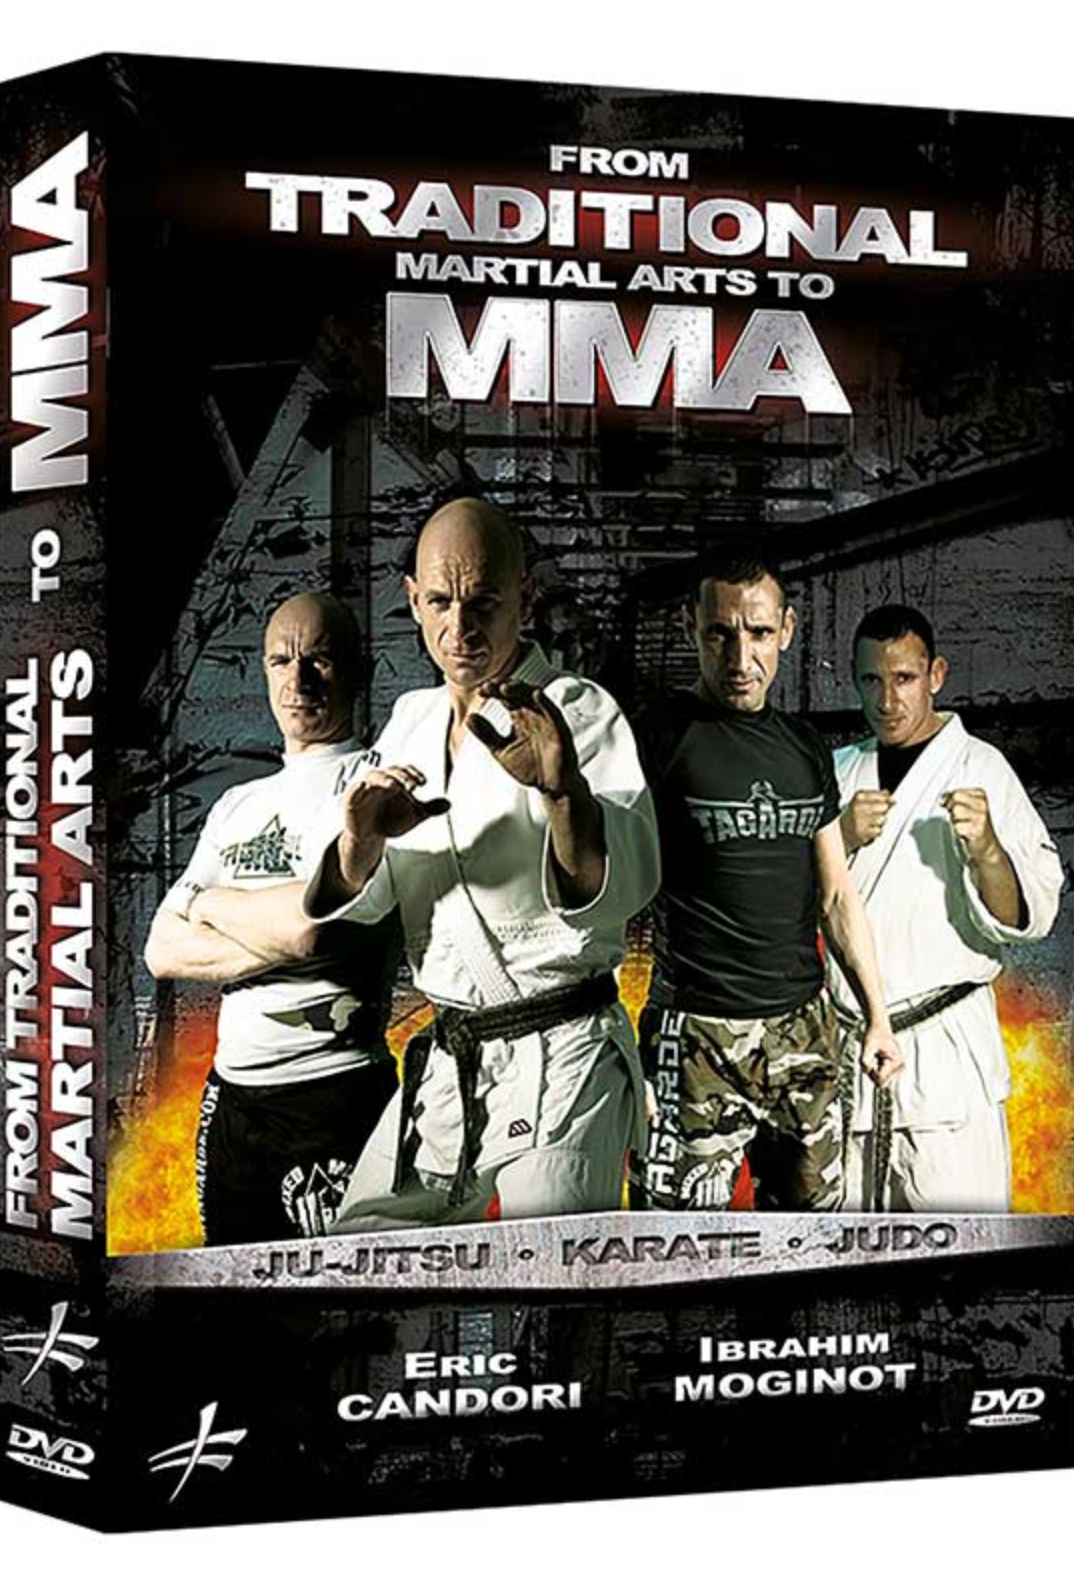 From Traditional Martial Arts to MMA DVD